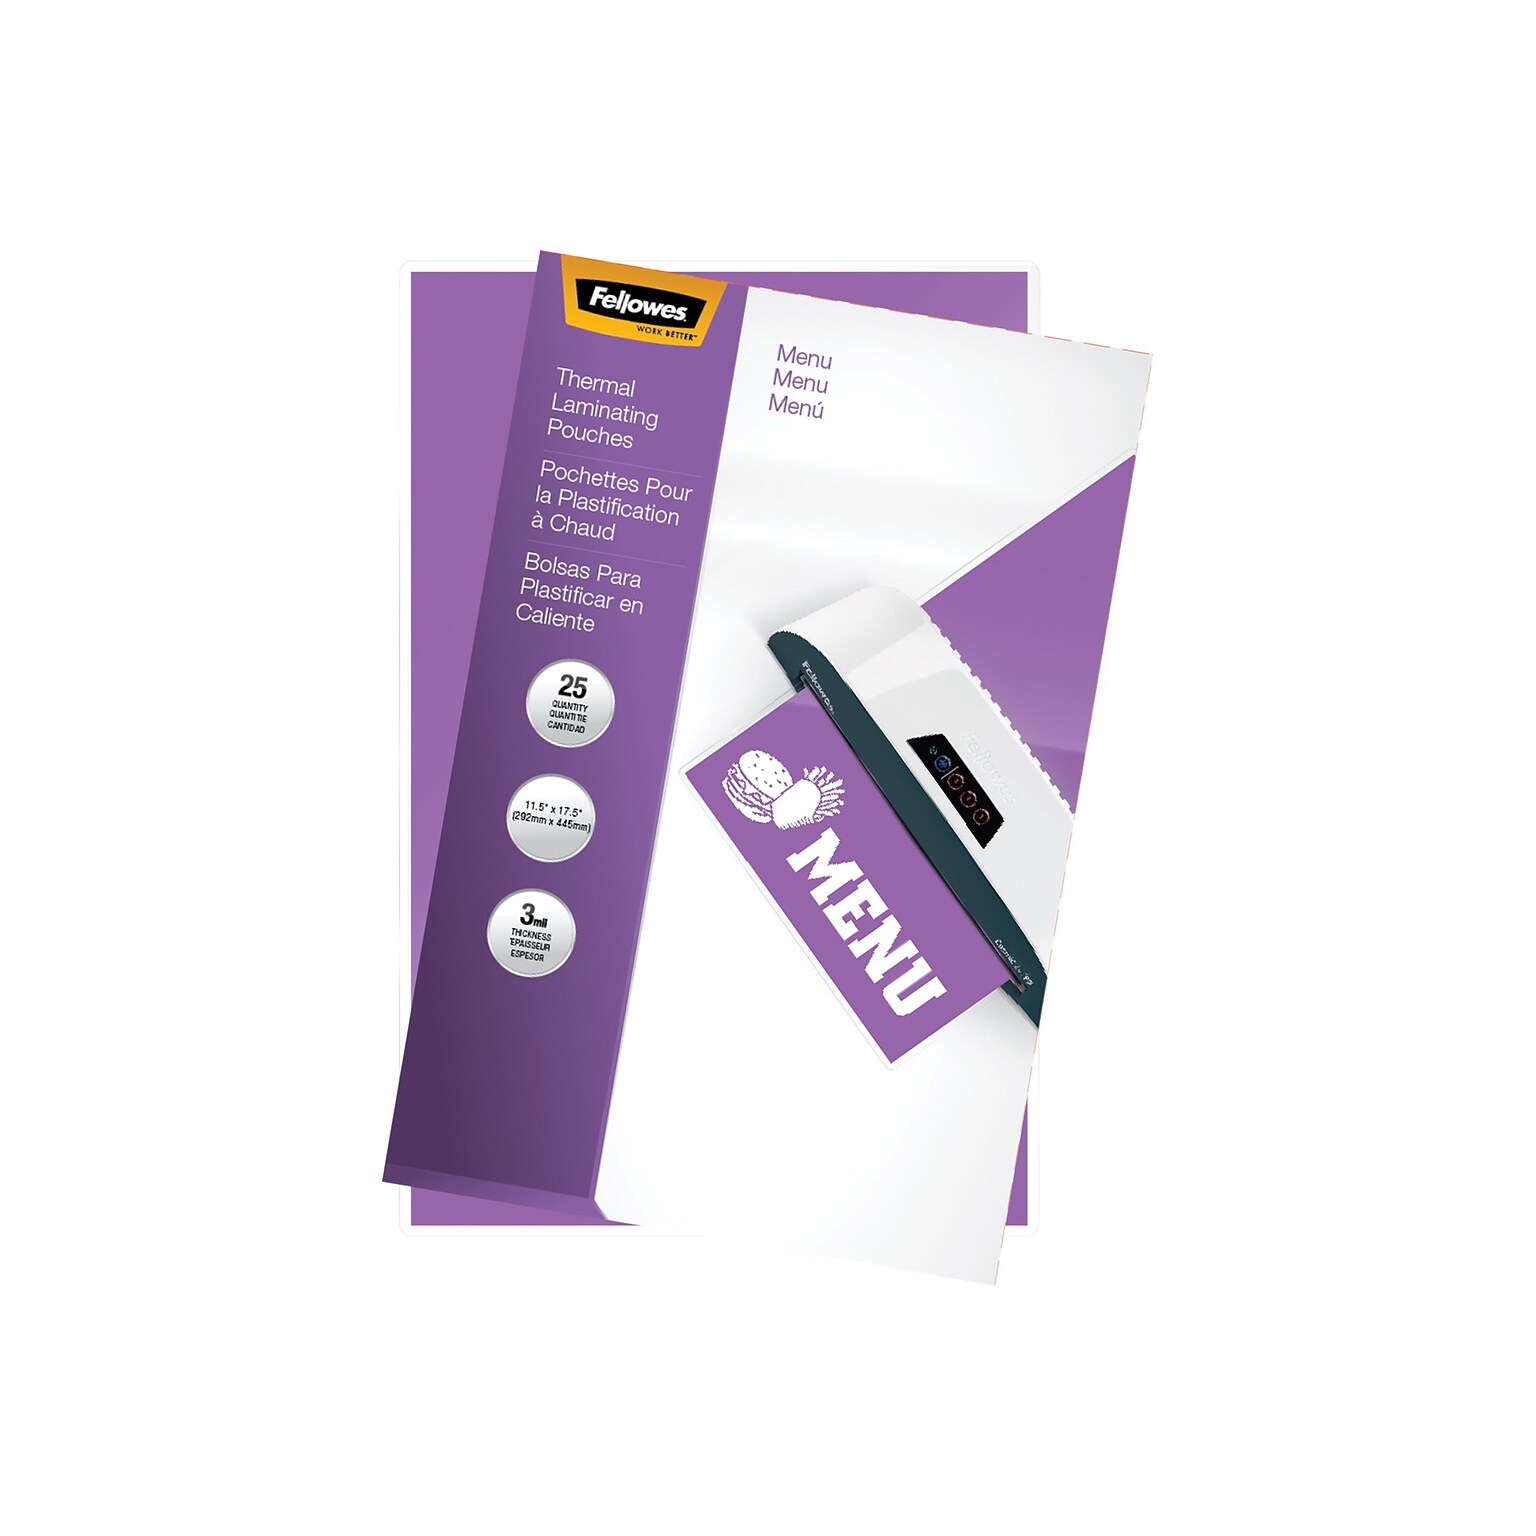 Fellowes Thermal Laminating Pouches, Menu, 3 Mil, 25/Pack (52011)